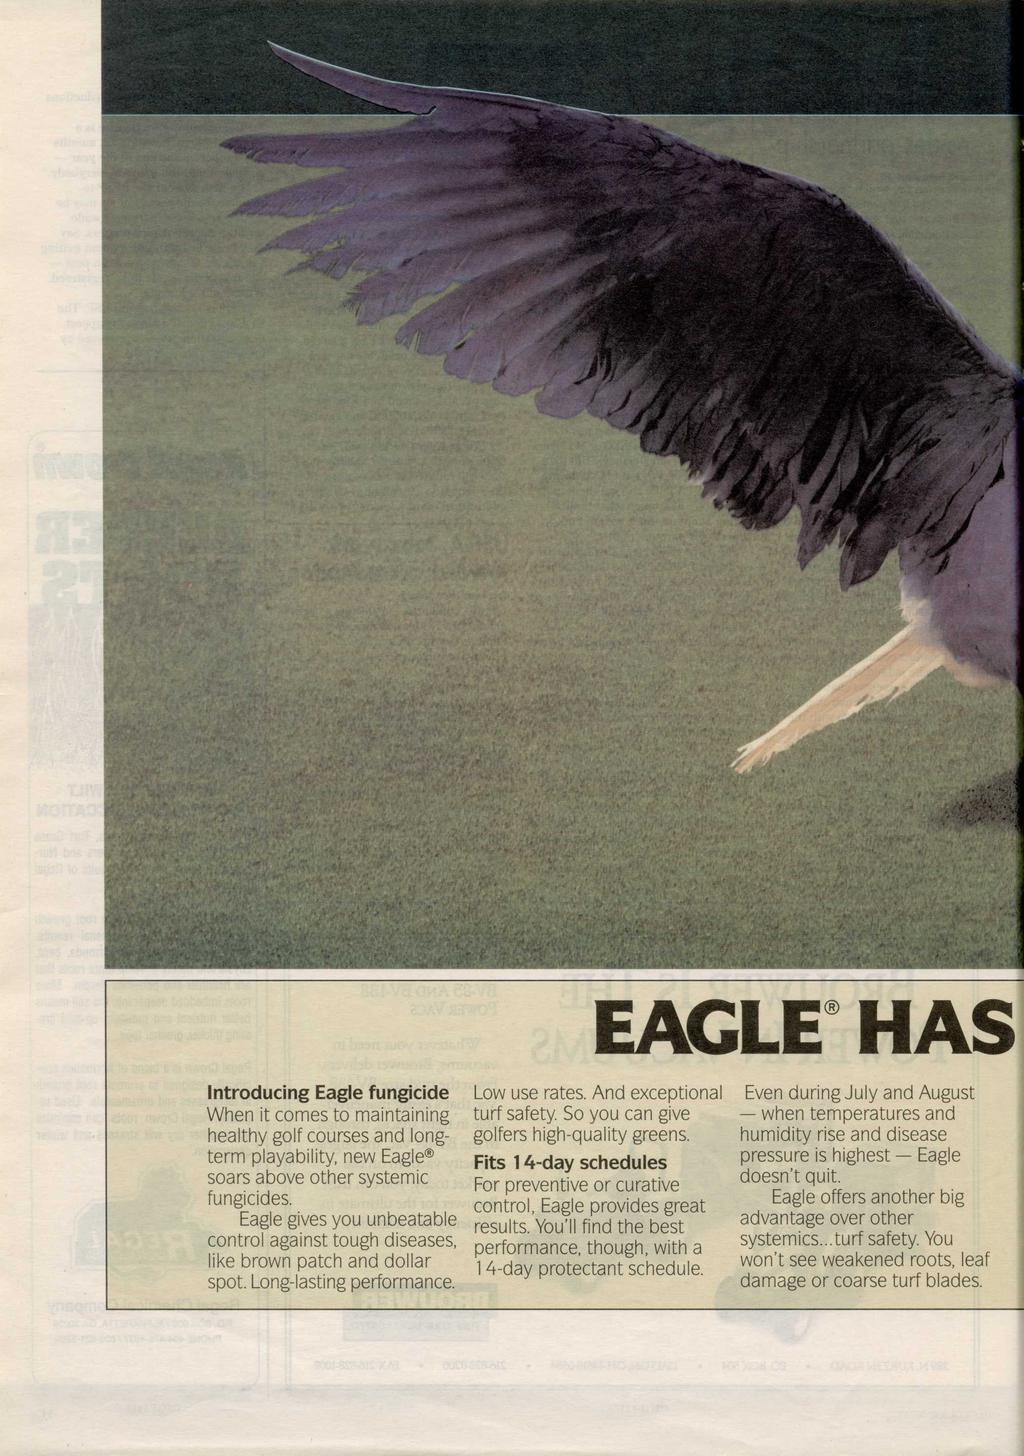 EAGLE HAS Introducing Eagle fungicide When it comes to maintaining healthy golf courses and longterm payability, new Eagle soars above other systemic fungicides.